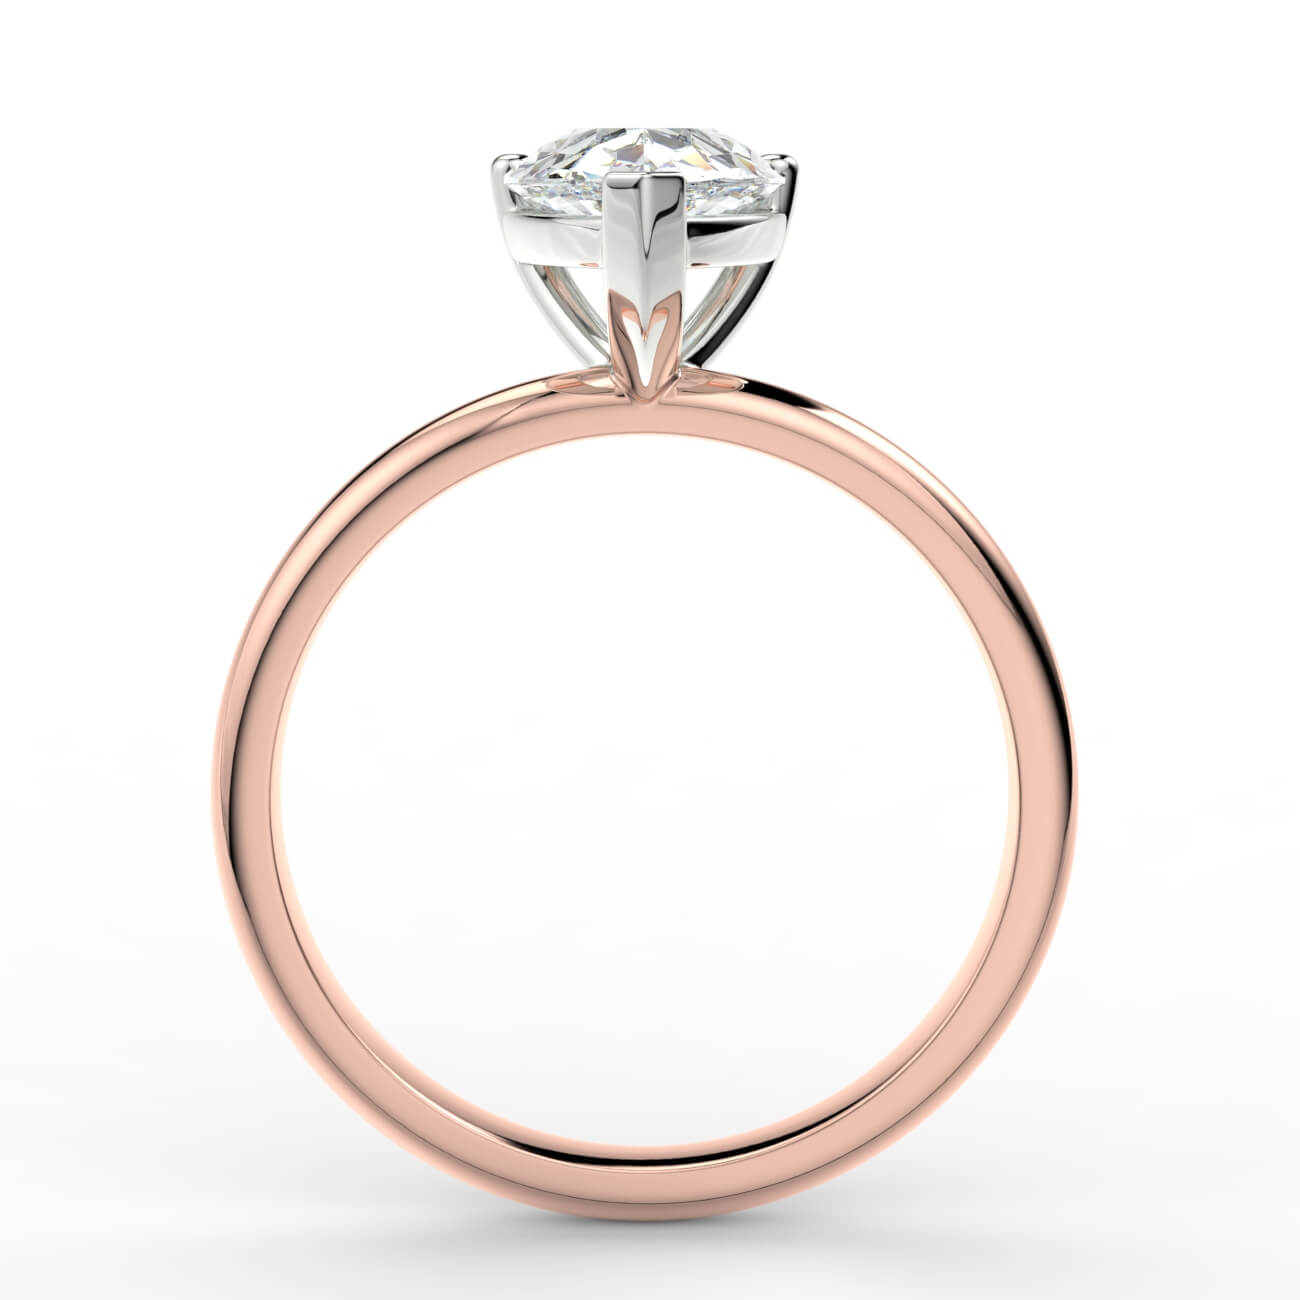 Solitaire pear shape diamond engagement ring in rose and gold – Australian Diamond Network